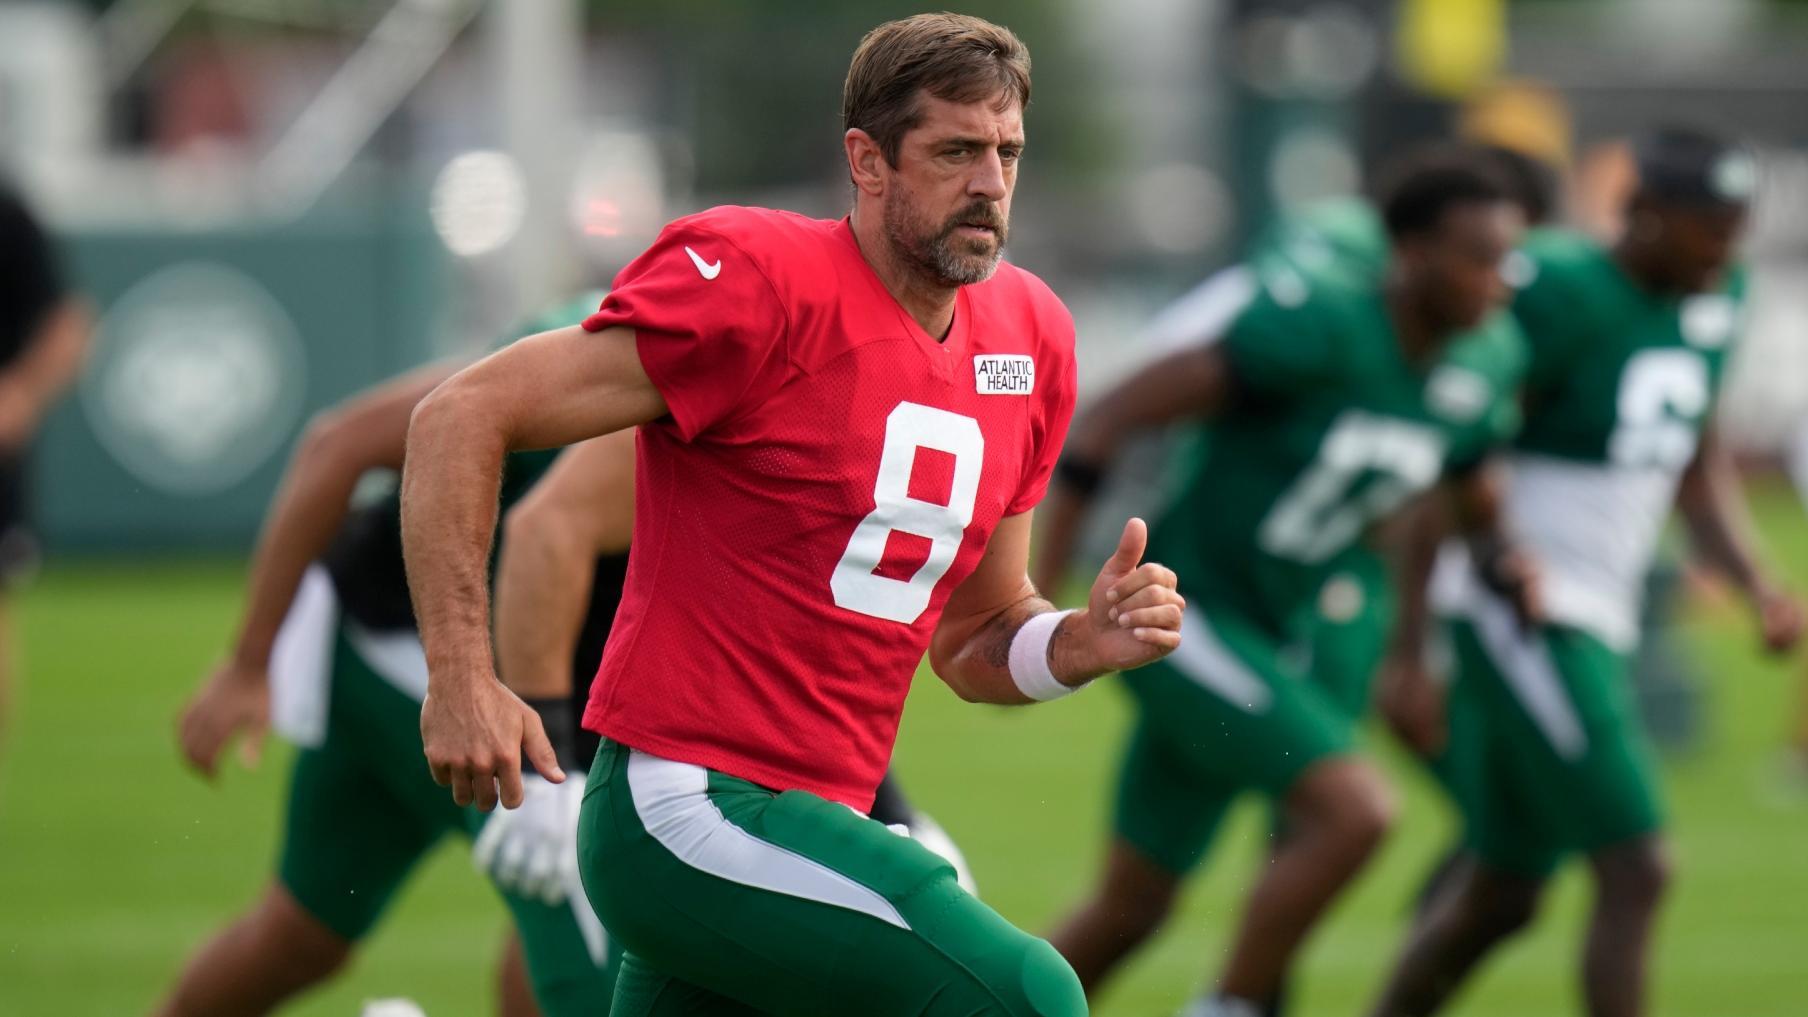 Bucs ready for joint practice with New York Jets